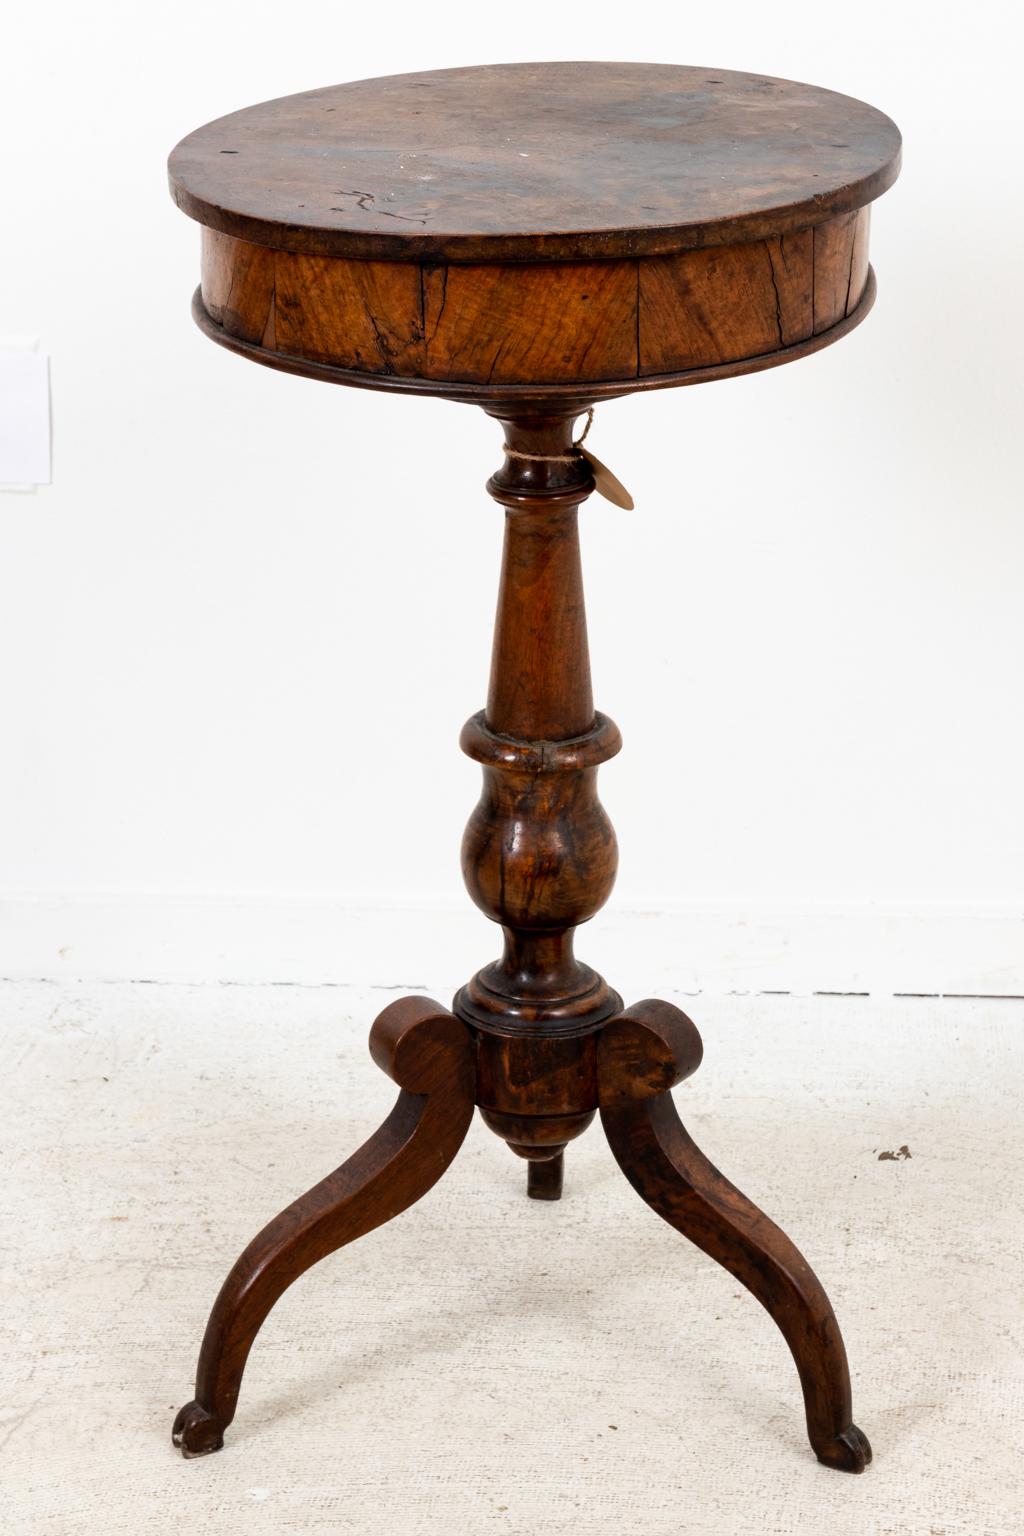 Circa 1830s continental round walnut work table on stand in the French Directoire style. Please note of wear consistent with age.